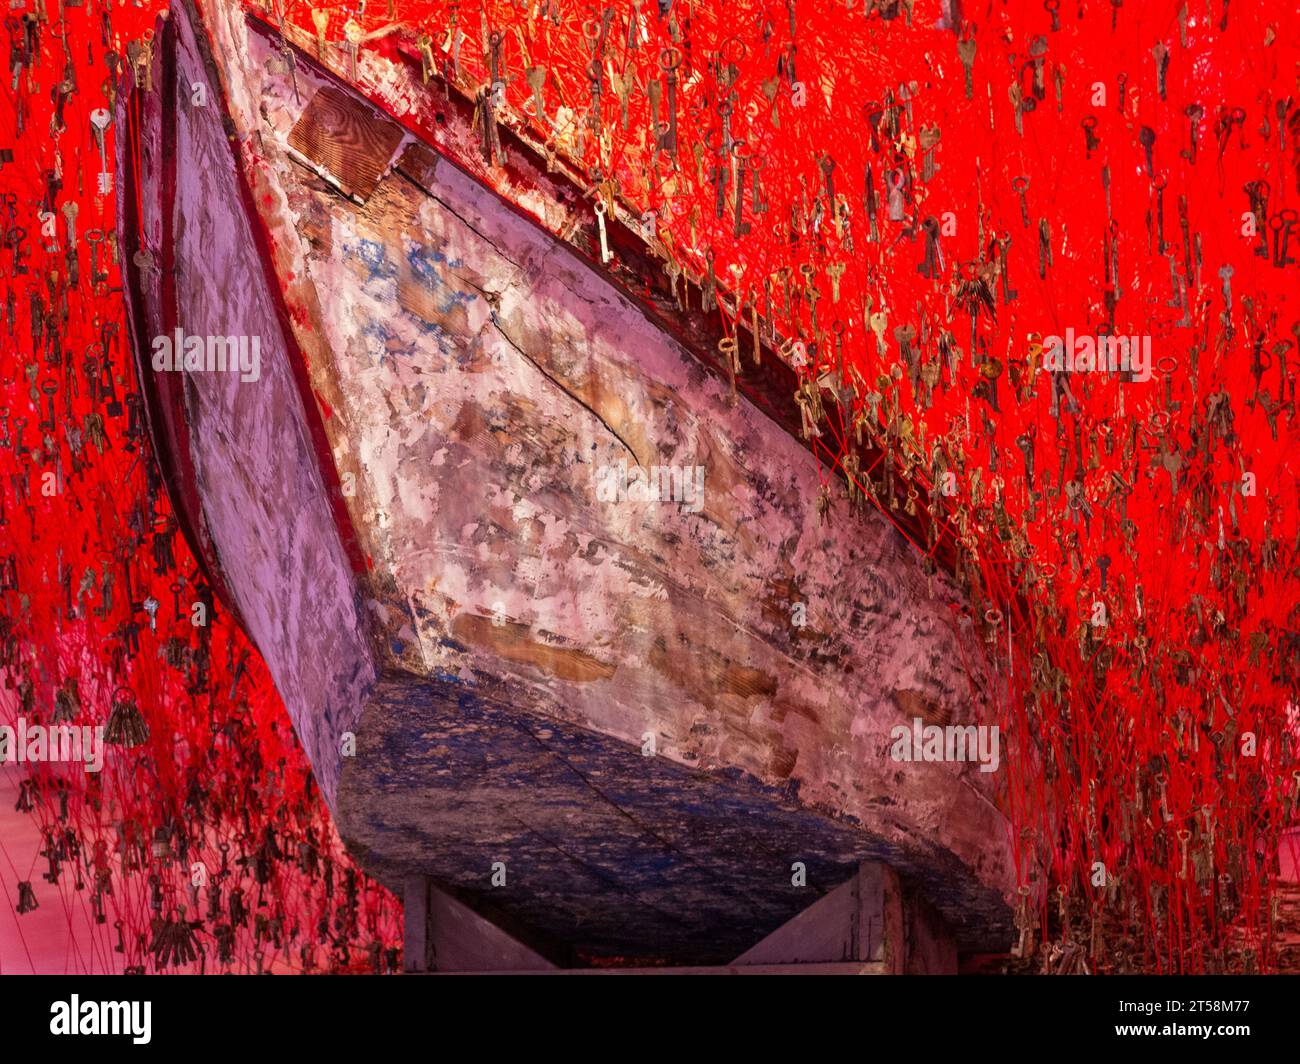 Chiharu Shiota: The key in the hand, Japanese Pavilion, Venice Biennale 2015. Detail of the boat surrounded by red keys. Stock Photo